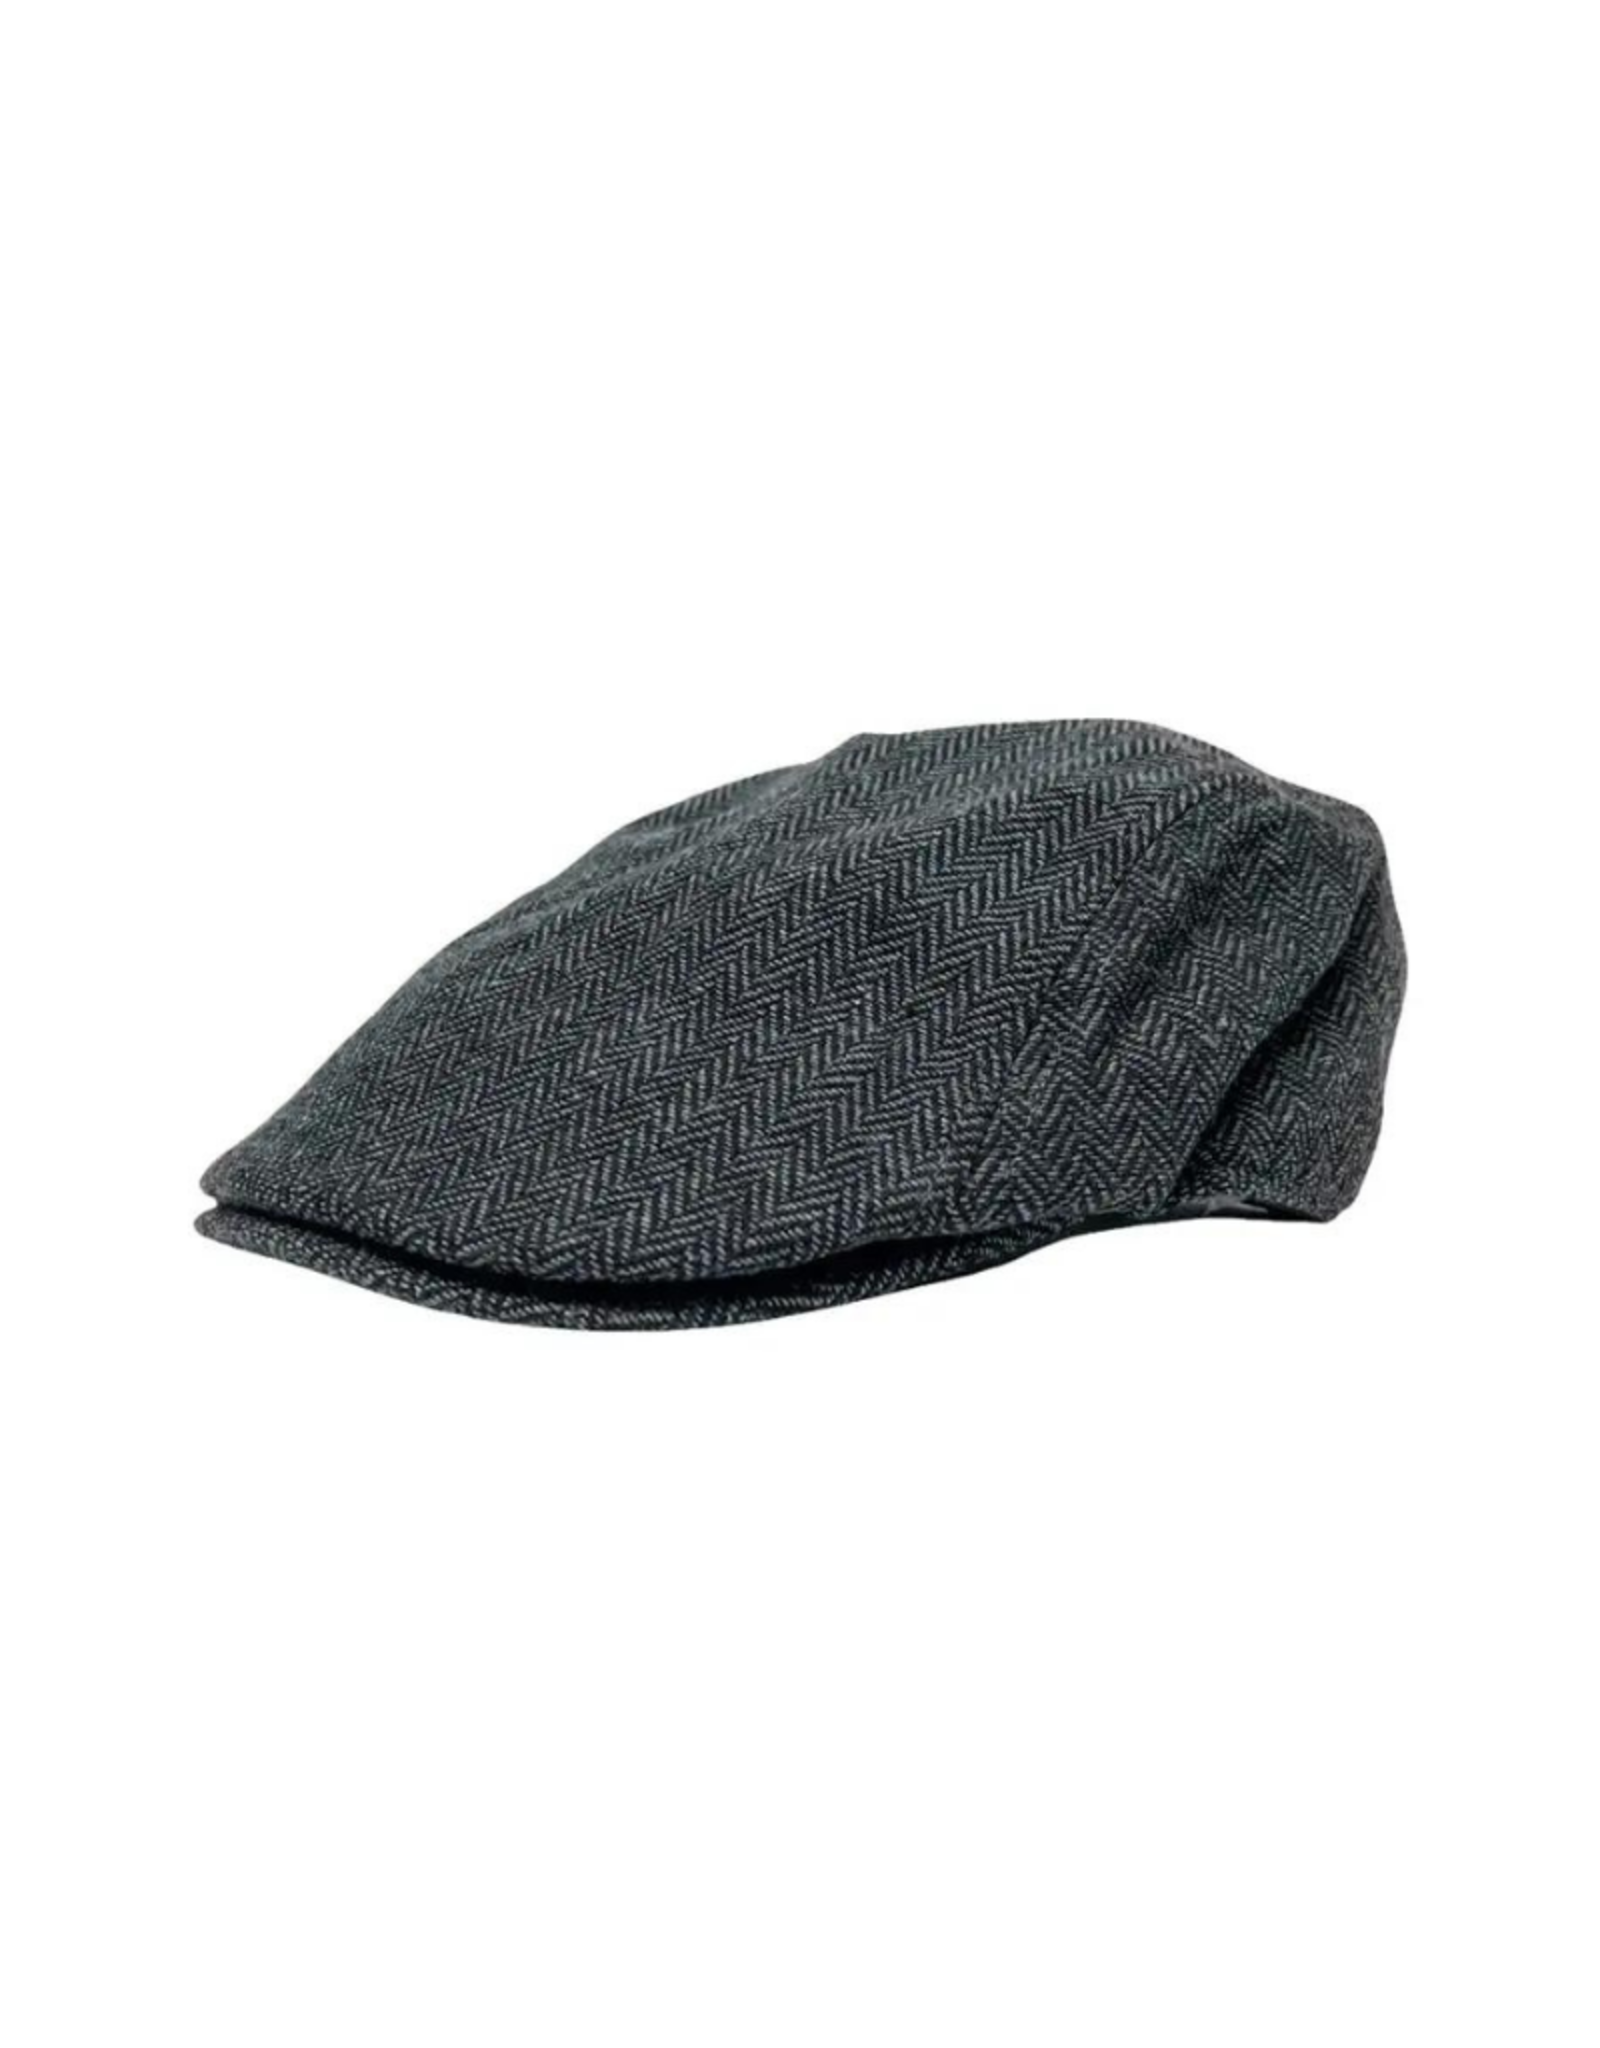 Faire/American Hat Makers HAT-NEWSBOY CAP "MIKEY"